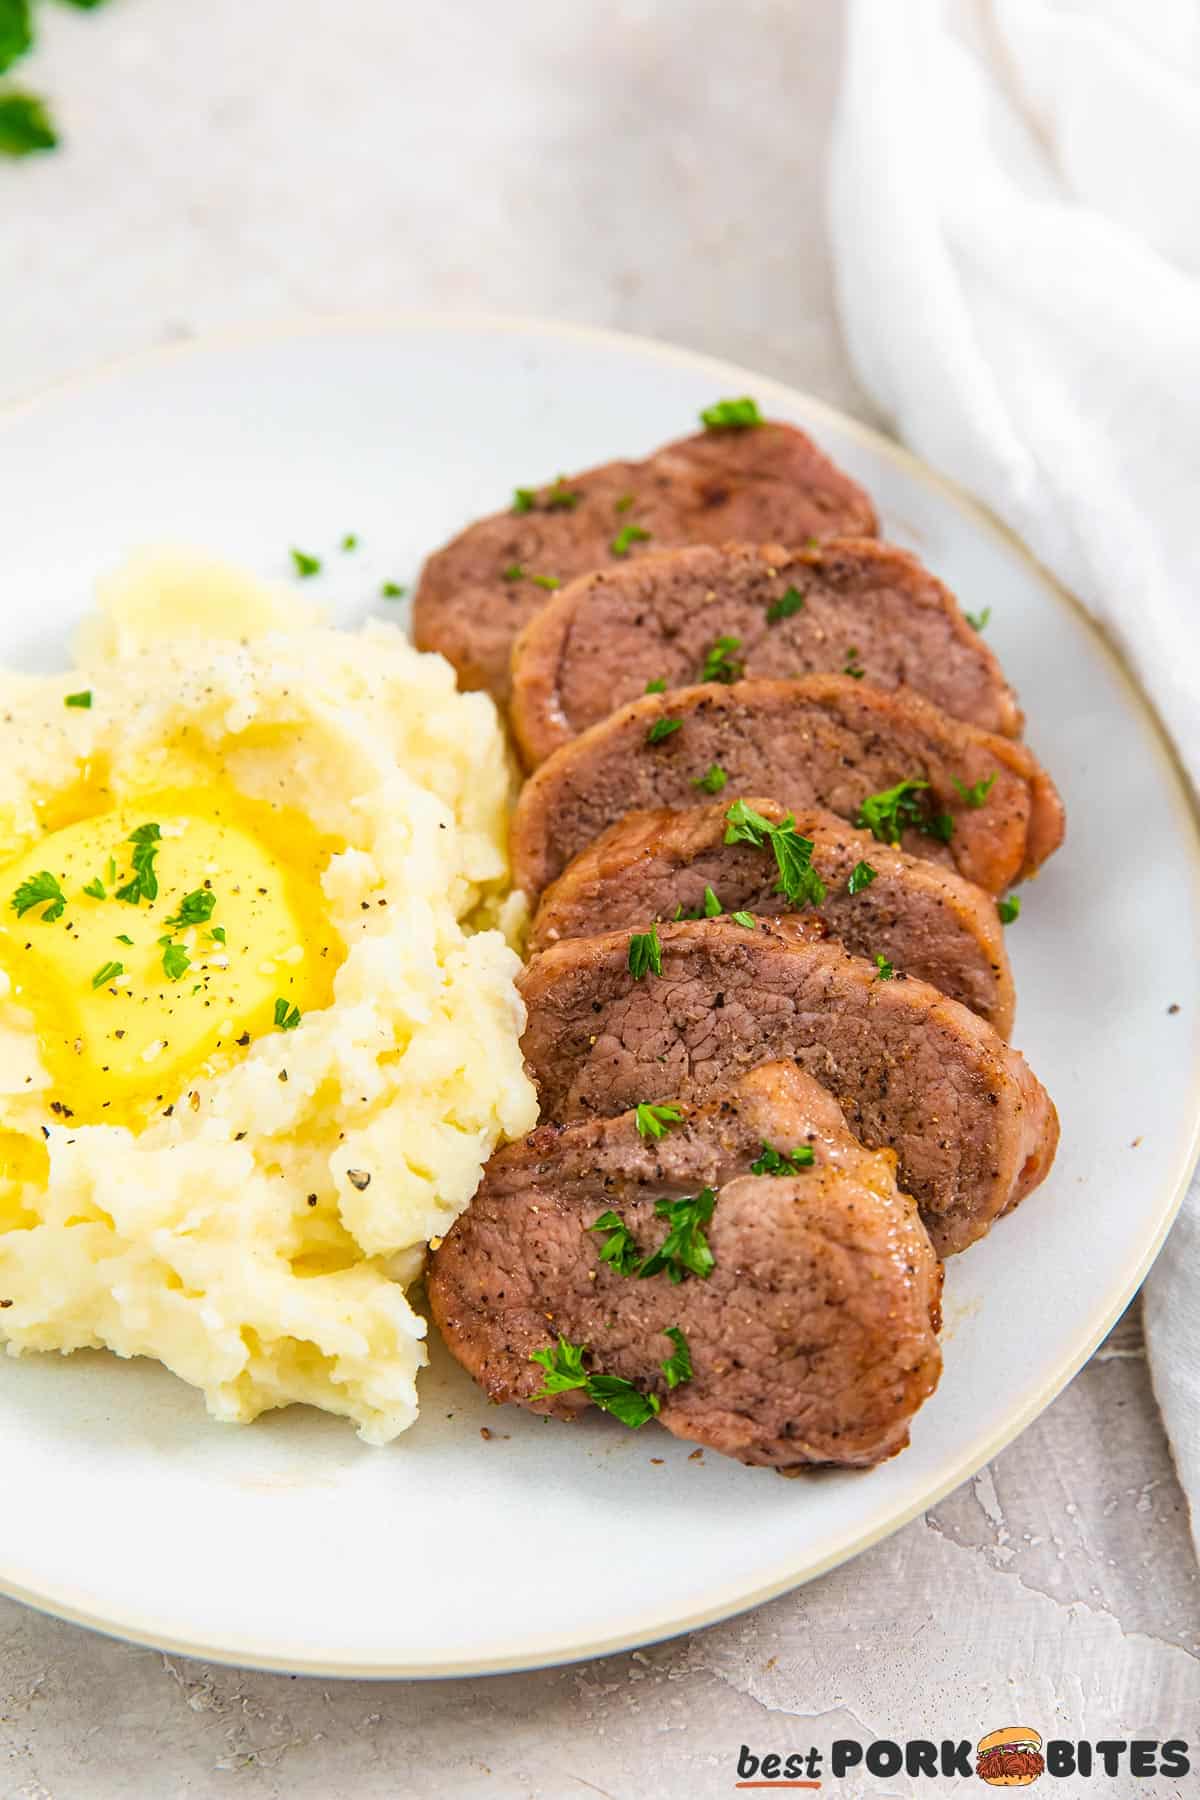 mashed potatoes and pork on a white plate